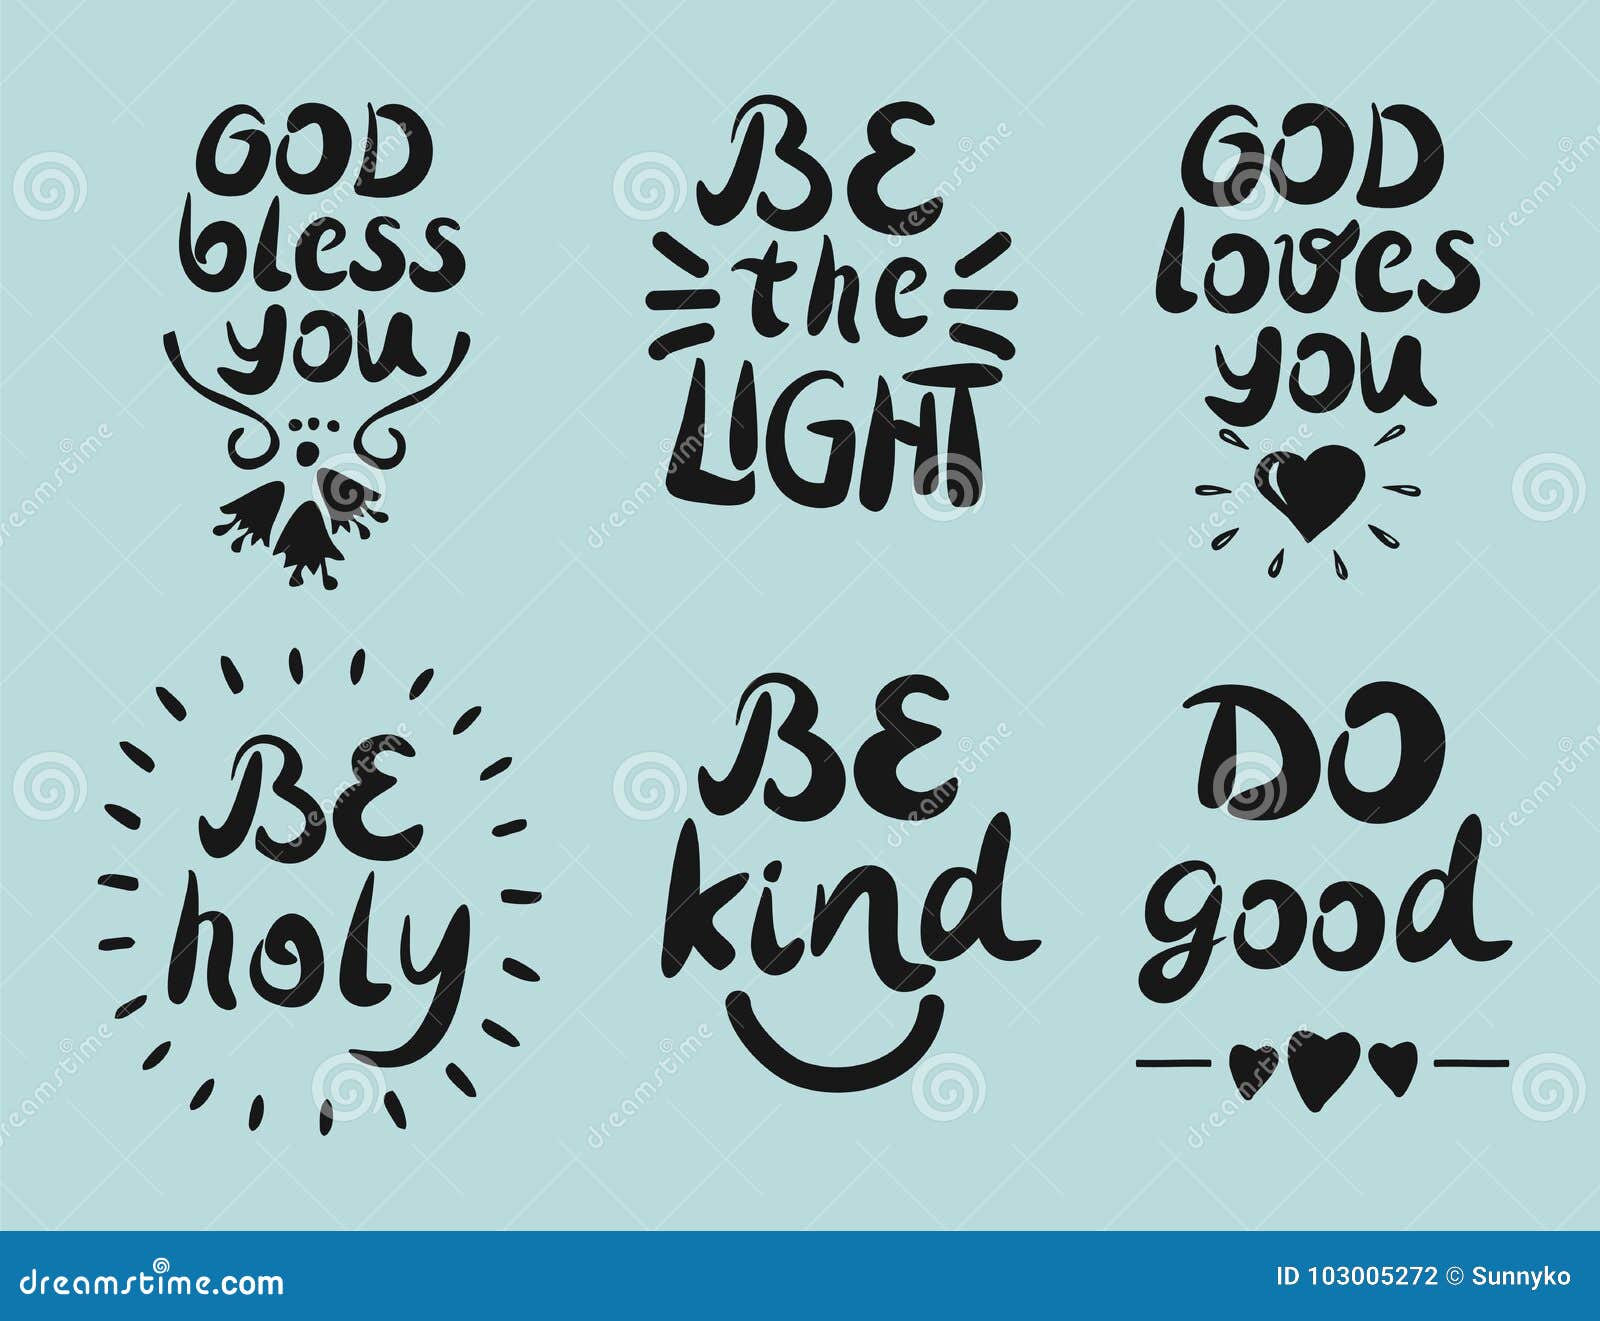 6 Hand Lettering Quotes God Bless You. Be the Light. Do Good Stock ...